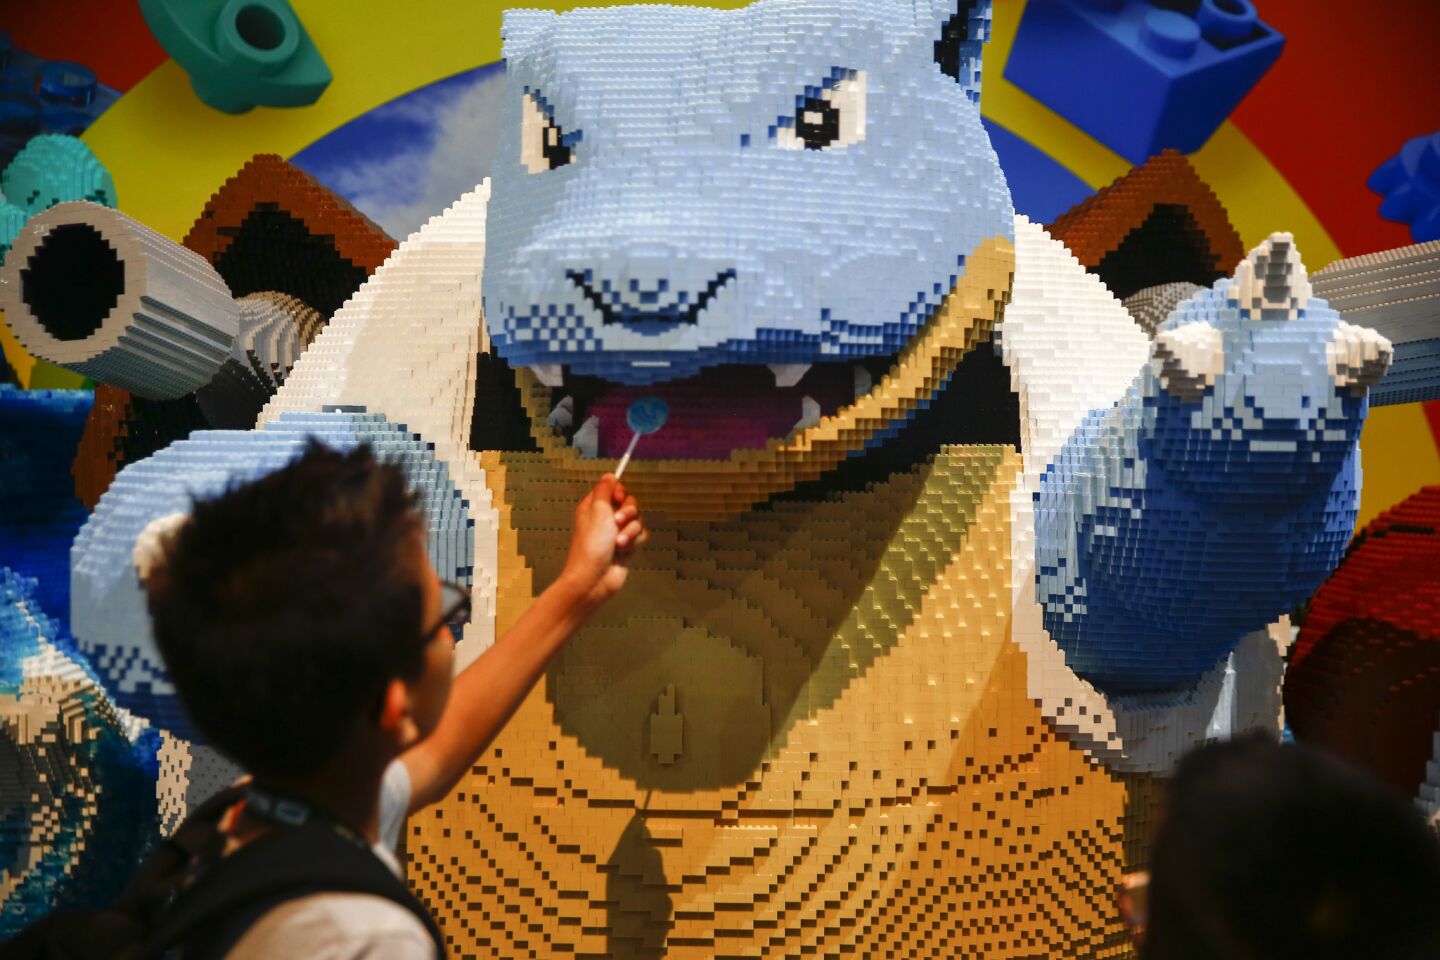 Tyler Lokum, 8, of Los Angeles offers his lollipop to a Mega Construx of the Pokemon Blastoise at the Mega Construx booth during a preview of the 2018 San Diego Comic-Con International.